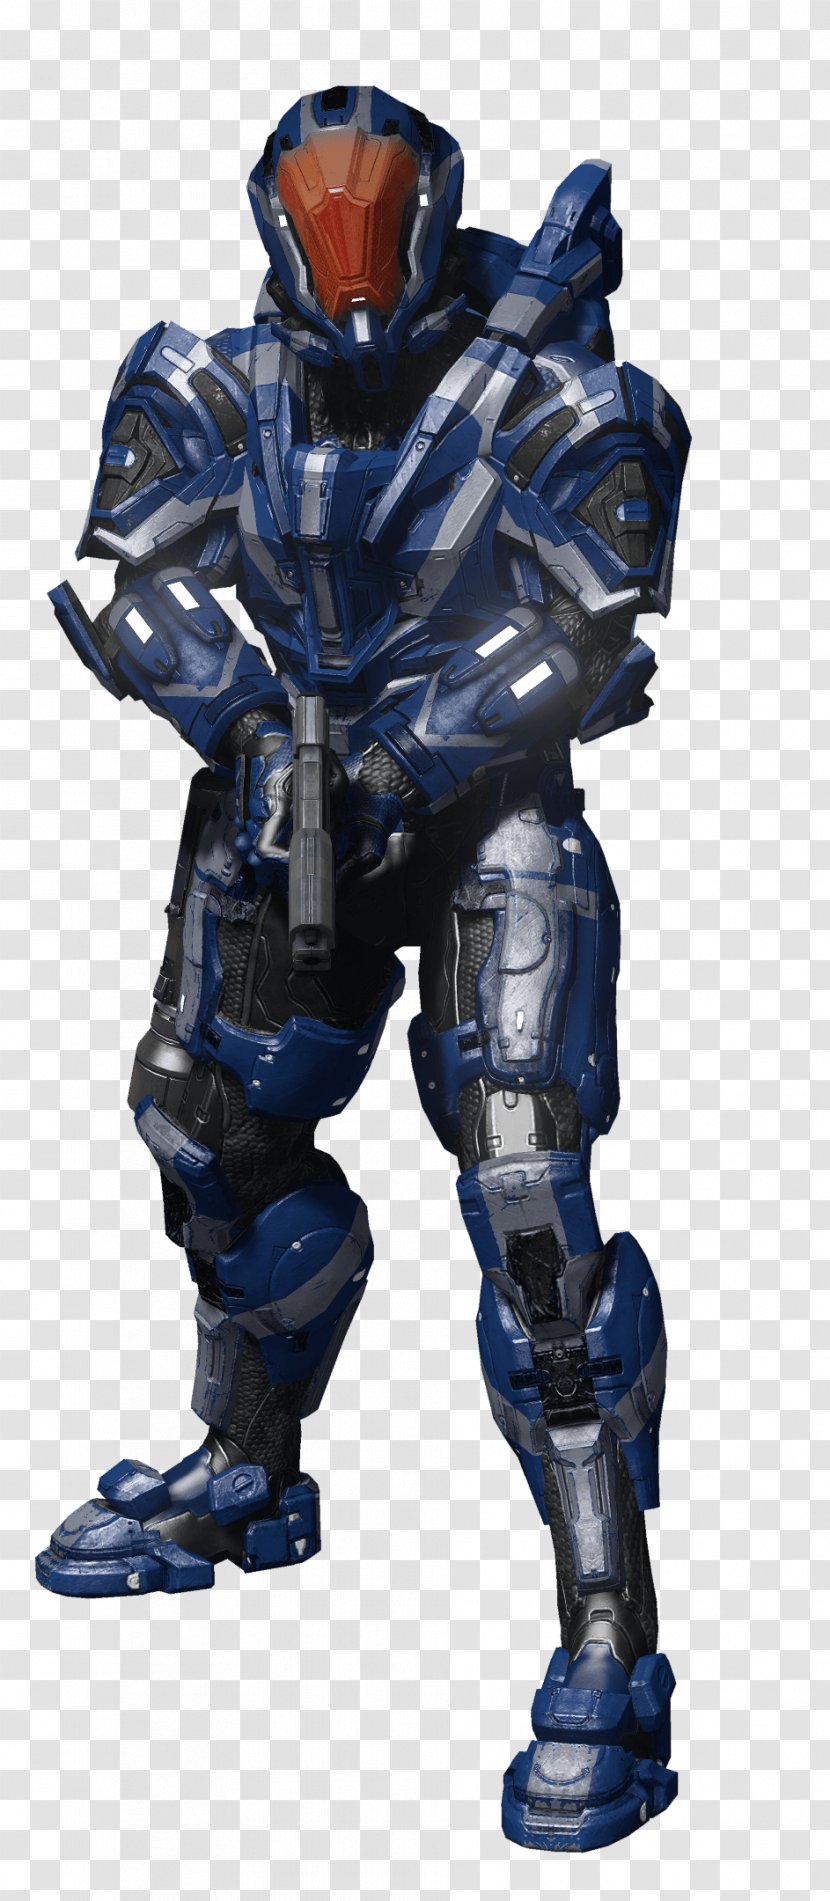 Halo 4 Halo: Reach Combat Evolved 3 Spartan - 343 Industries Transparent PNG